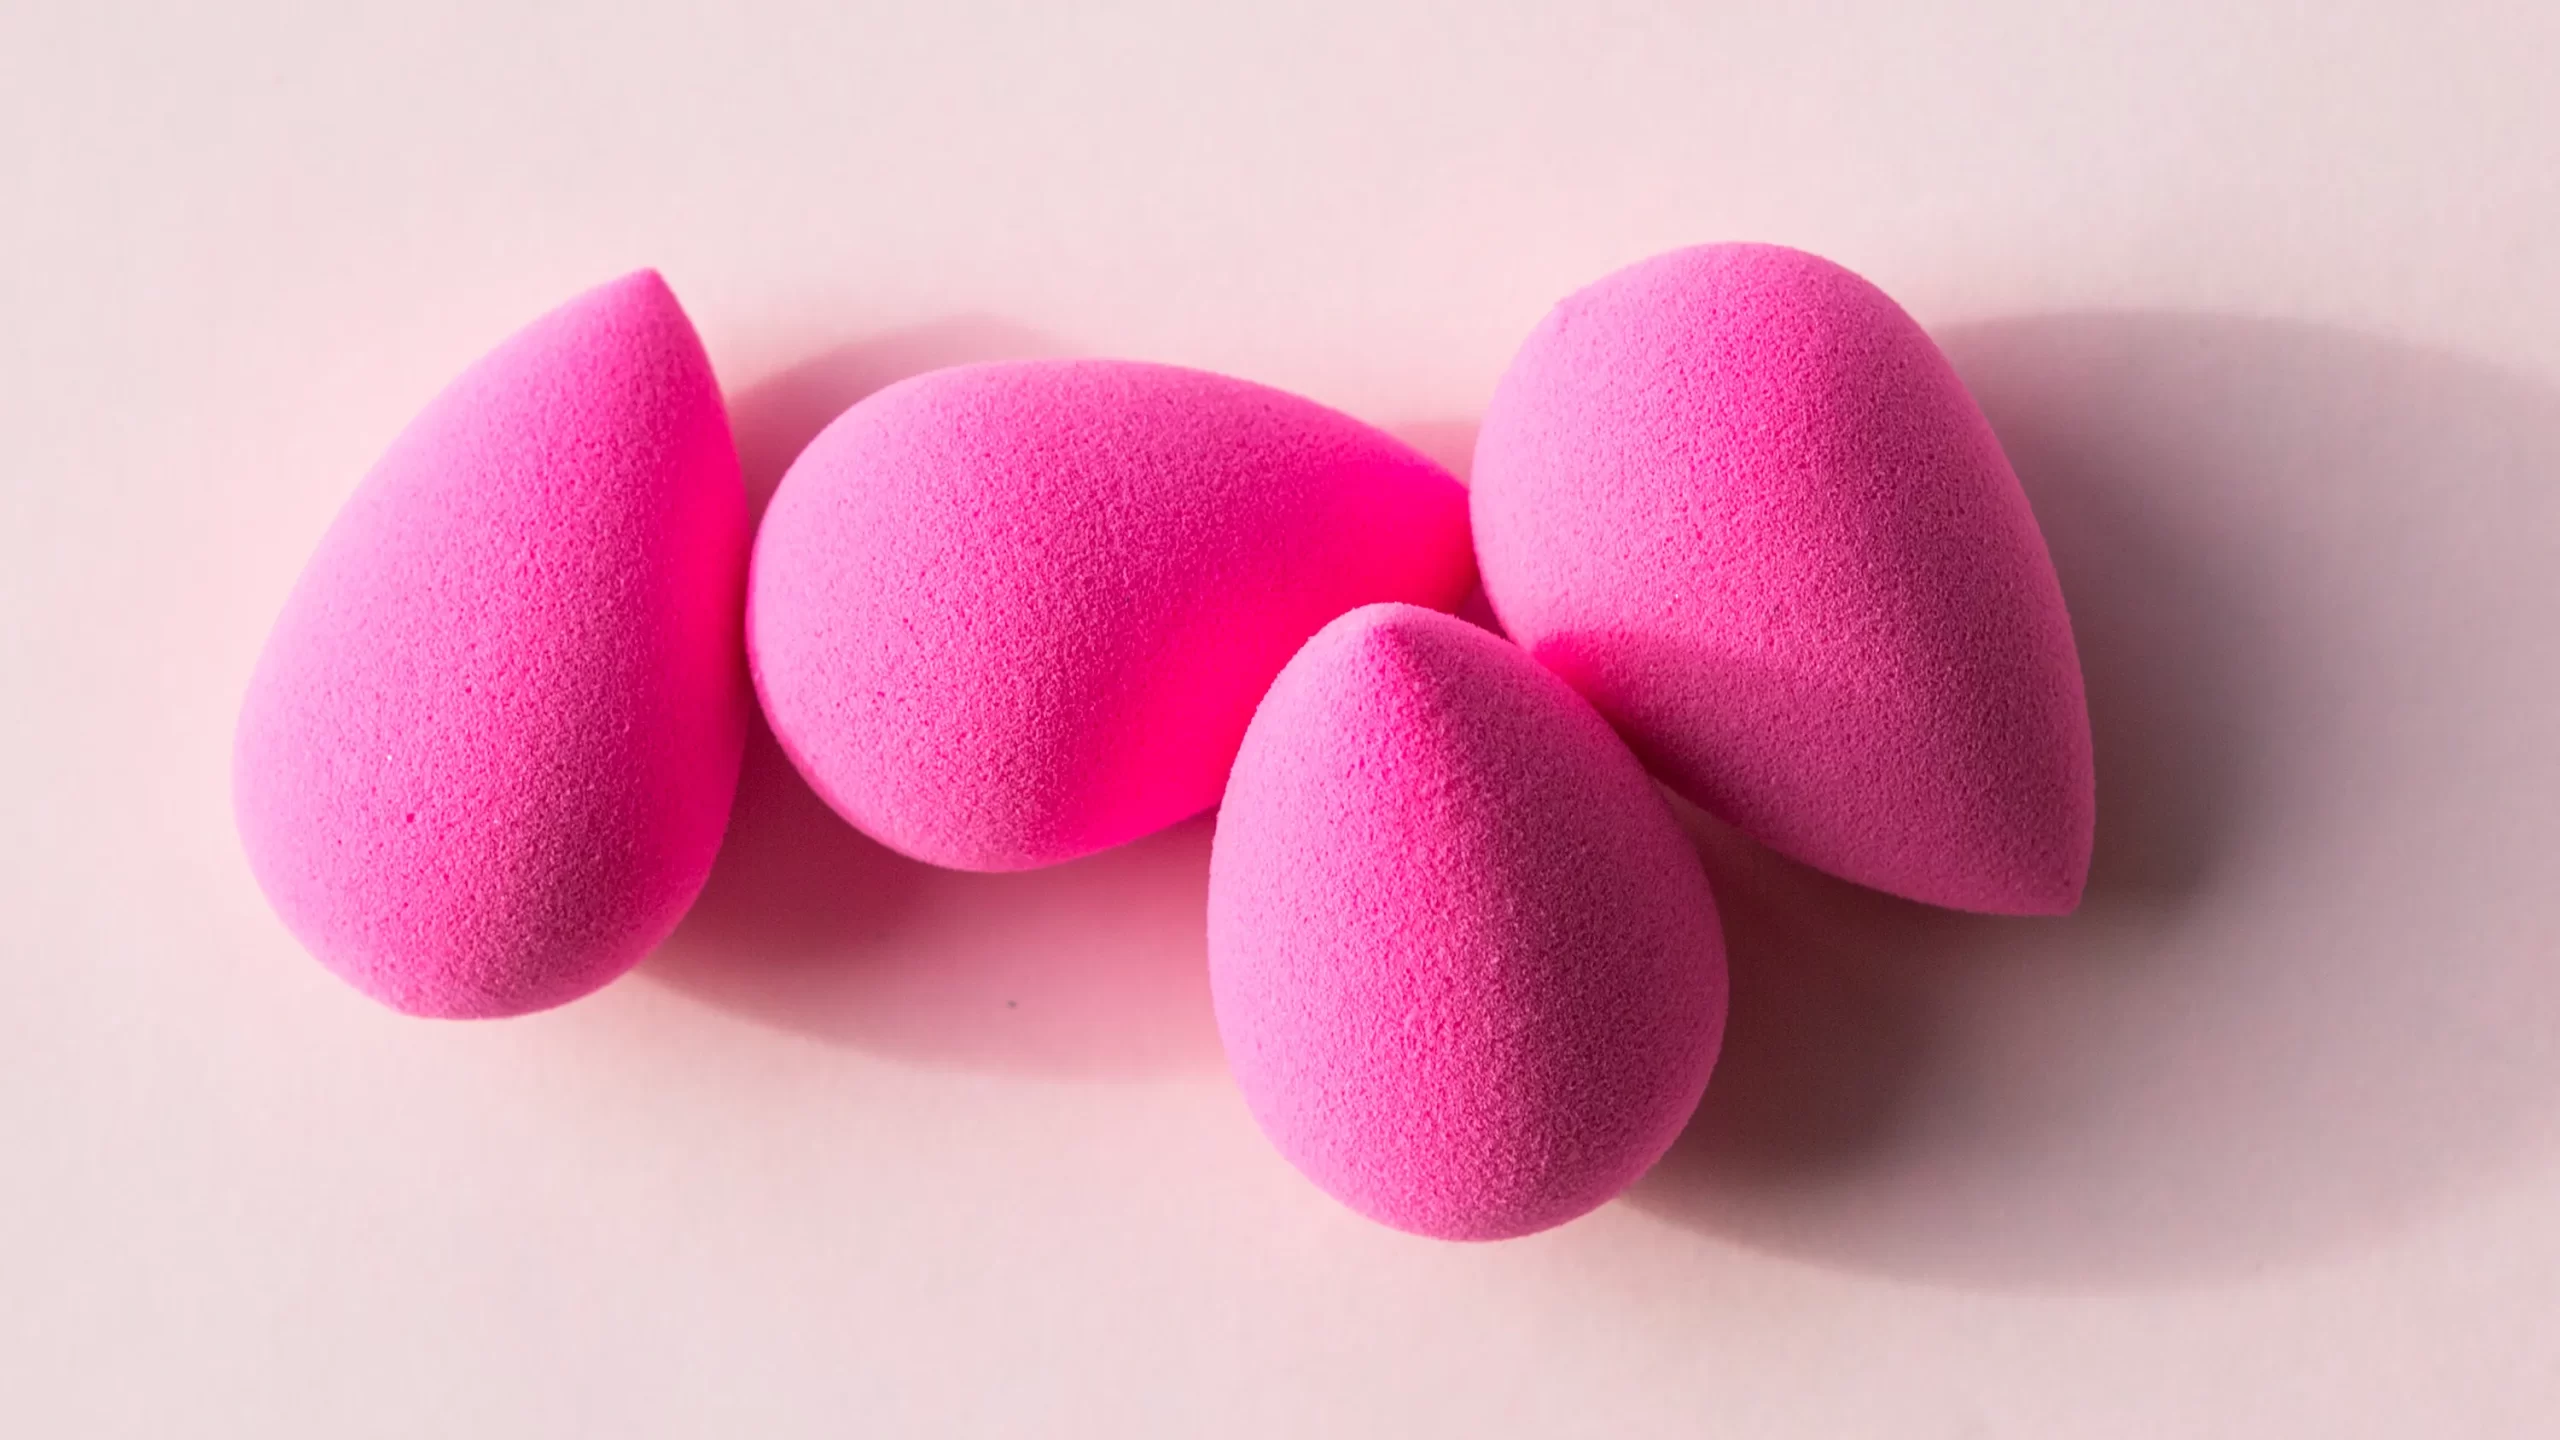 How to Clean a Makeup Sponge